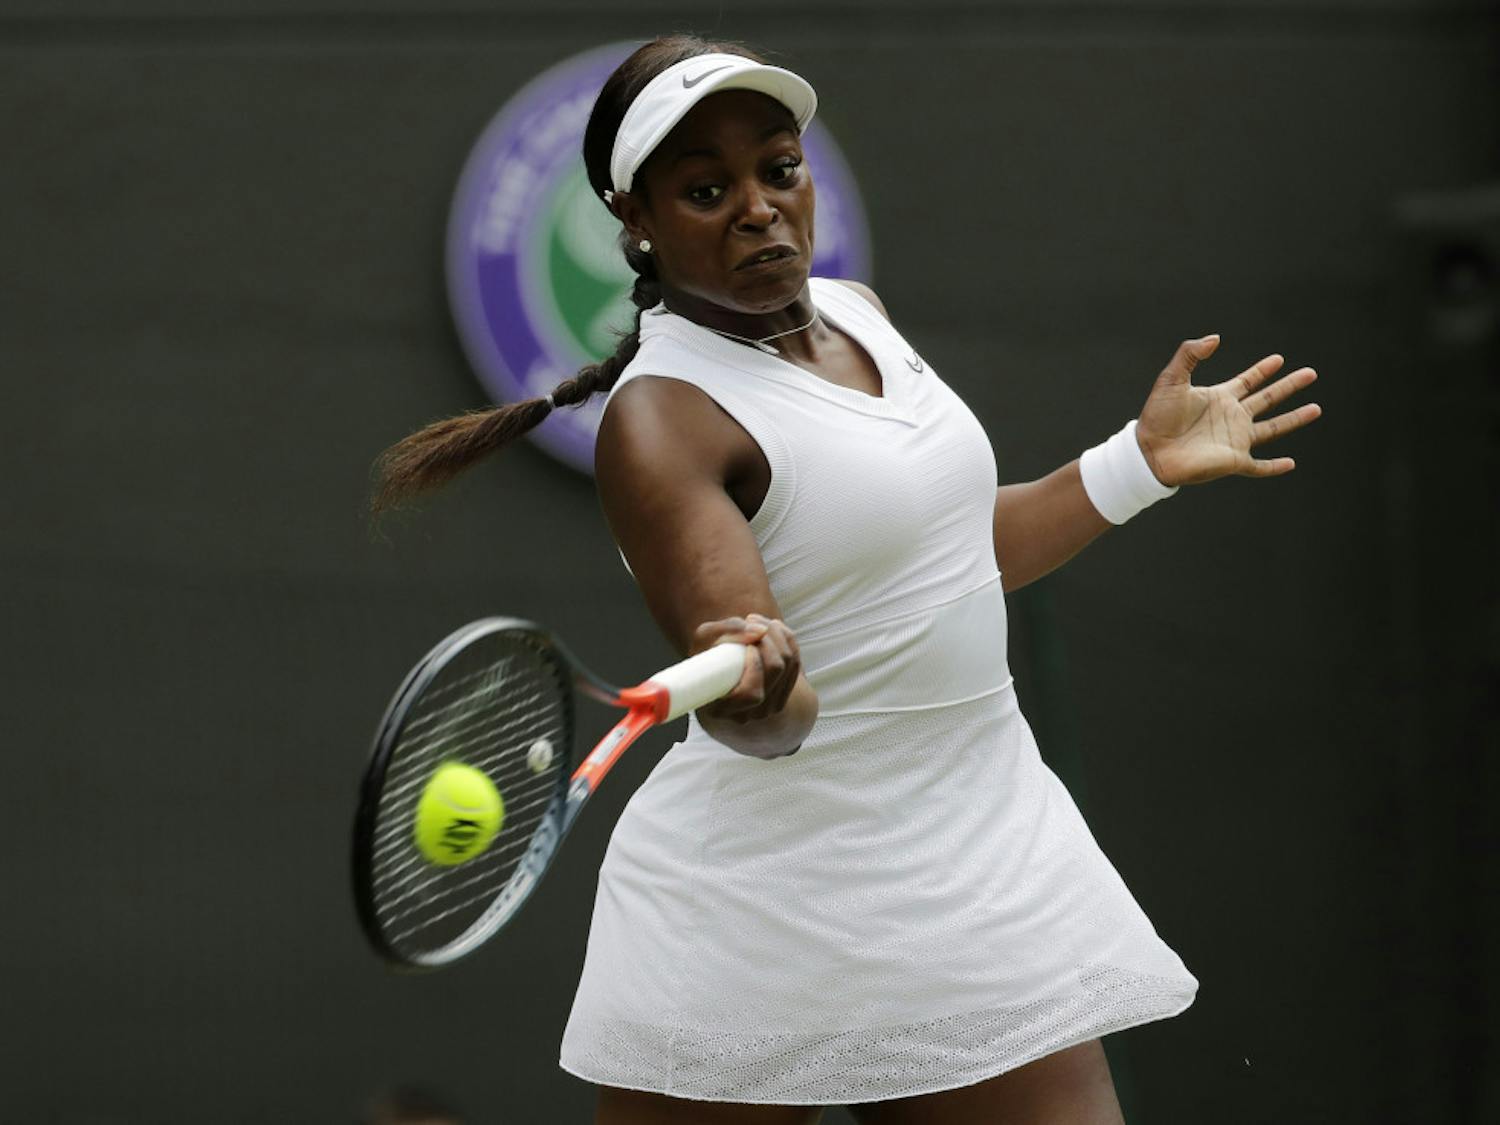 FILE - In this July 6, 2019, file photo, Sloane Stephens returns to Britain's Johanna Konta in a women's singles match at the Wimbledon Tennis Championships in London. Any World TeamTennis player or coach who tests positive for COVID-19 when arriving for the three-week 2020 season will be dropped from the league without pay. The health plan released Tuesday, June 16, 2020, by the WTT for its matches starting July 12 at The Greenbrier in West Virginia also calls for two daily temperature checks for spectators, no ball kids, a chair umpire aided by electronic line-calling instead of line judges, and no high-fives or handshakes between opponents. The rosters announced for the WTT's nine teams include Grand Slam title winners Kim Clijsters, Sloane Stephens, Sofia Kenin and the Bryan brothers. (AP Photo/Ben Curtis, File)